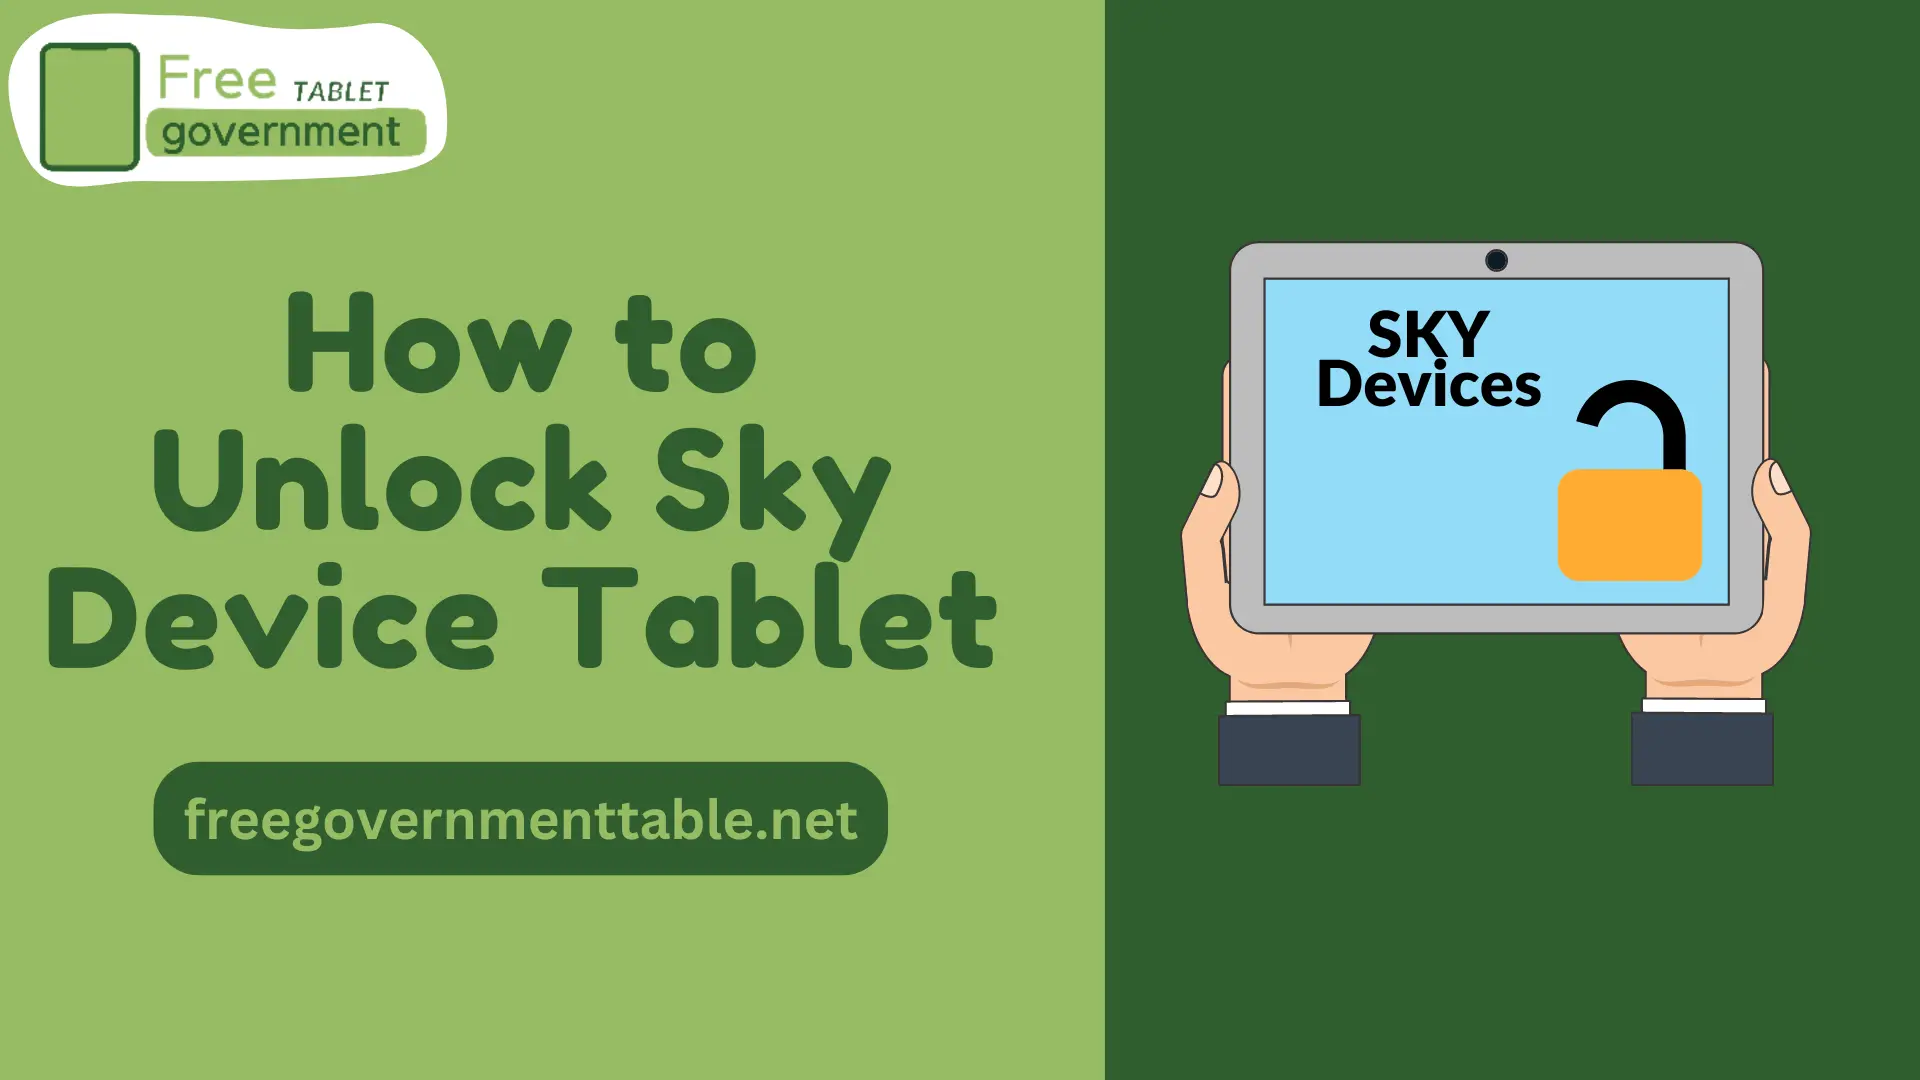 How to Unlock Sky Device Tablet